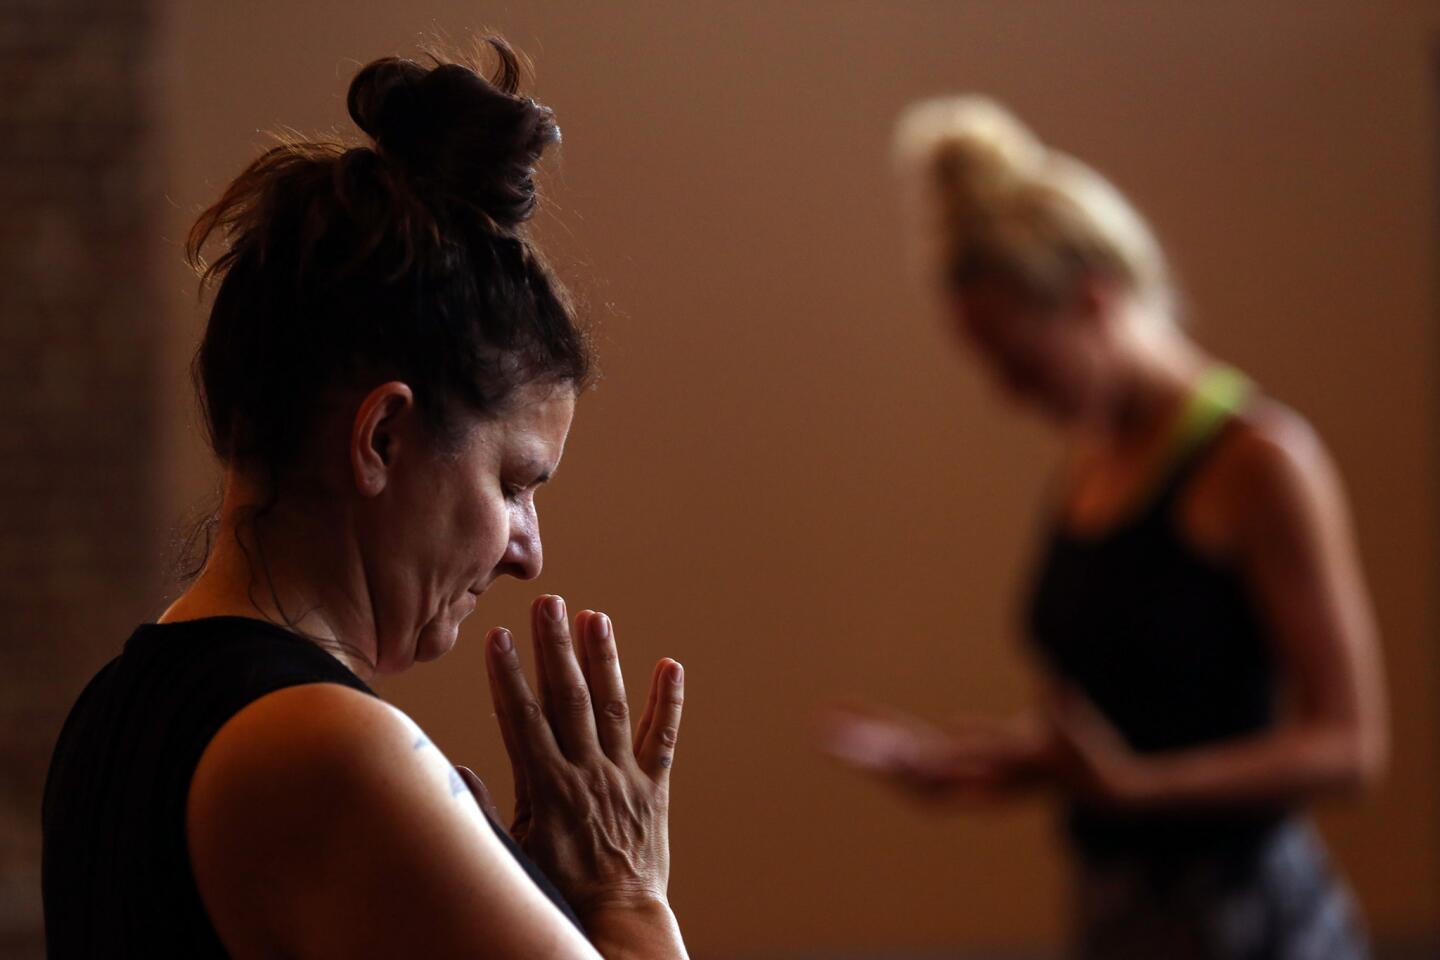 The Flow yoga class is taught by Jenn Perry, right, at Wanderlust Hollywood, a meditation and yoga center. The Hollywood studio is a fusion of classes and experiences, including yoga, nutrition, meditation, film screenings, wine tastings and jewelry making.